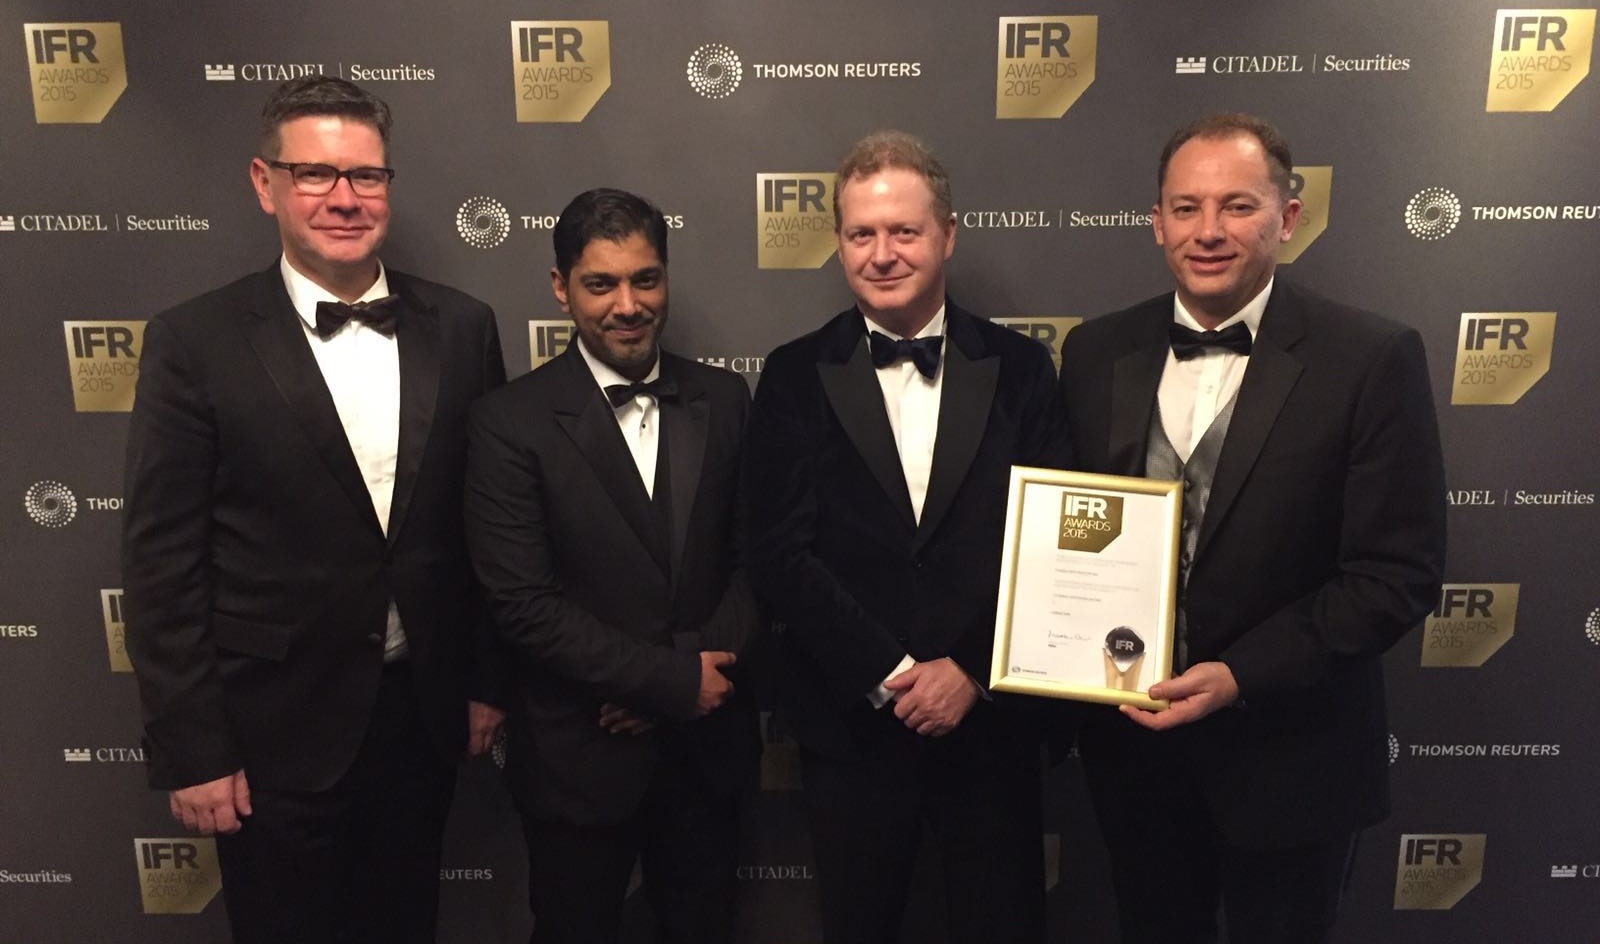 ETIHAD_AIRWAYS_PRESENTED_WITH_TWO_LEADING_INTERNATIONAL_FINANCE_AWARDS_IN_LONDON